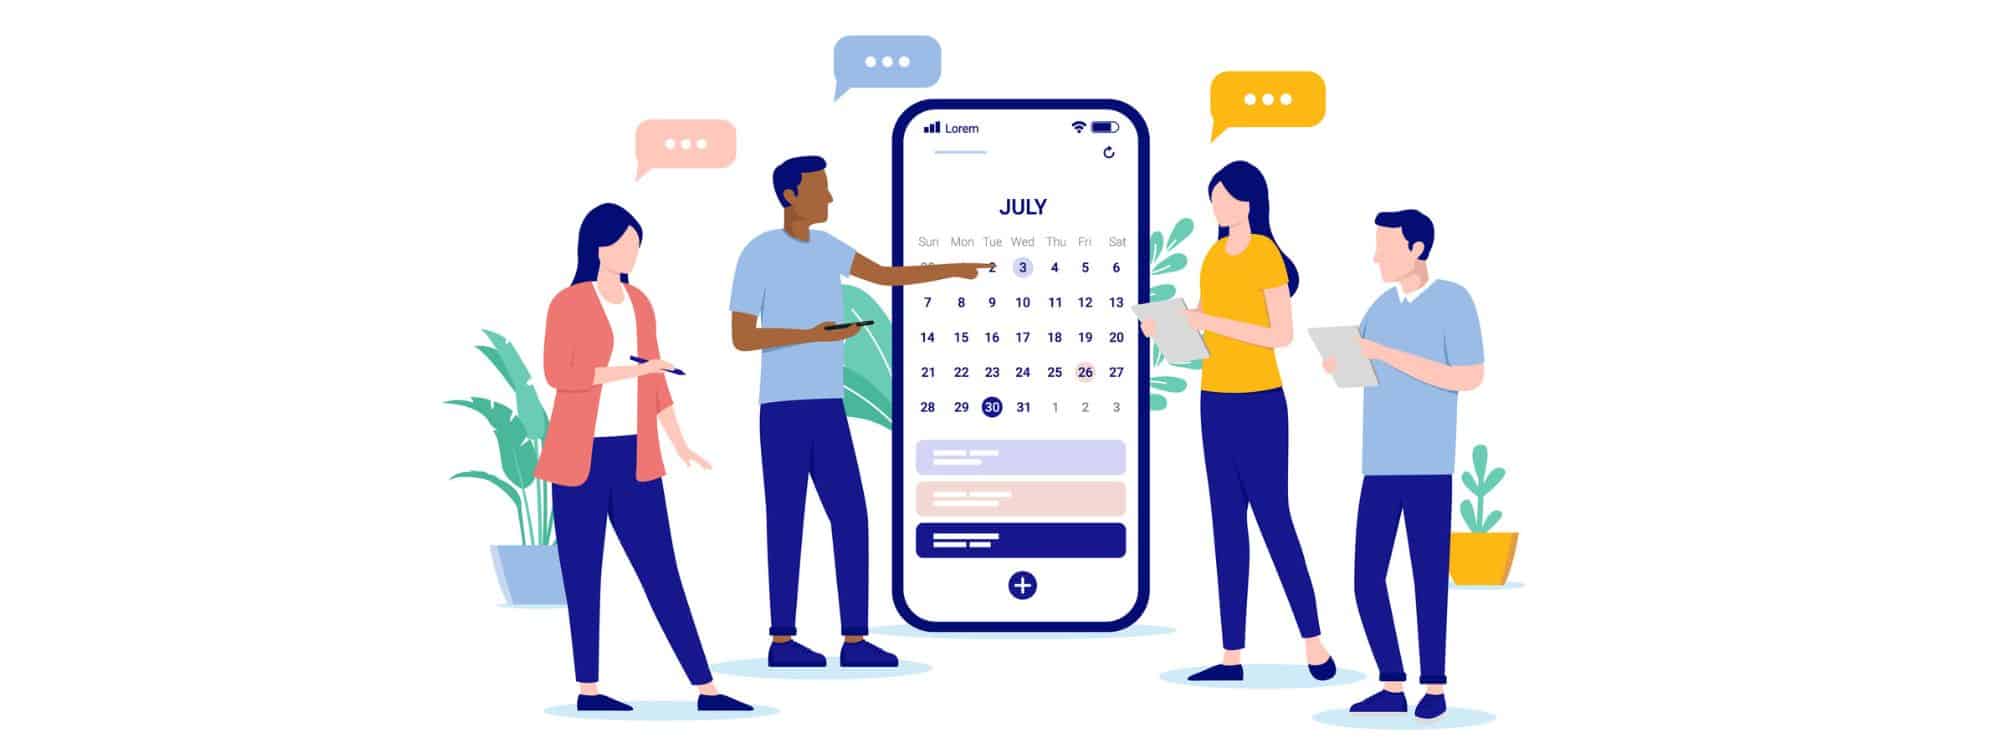 flat art illustration of four employees standing around a giant smartphone with a calendar screen from an employee app on it